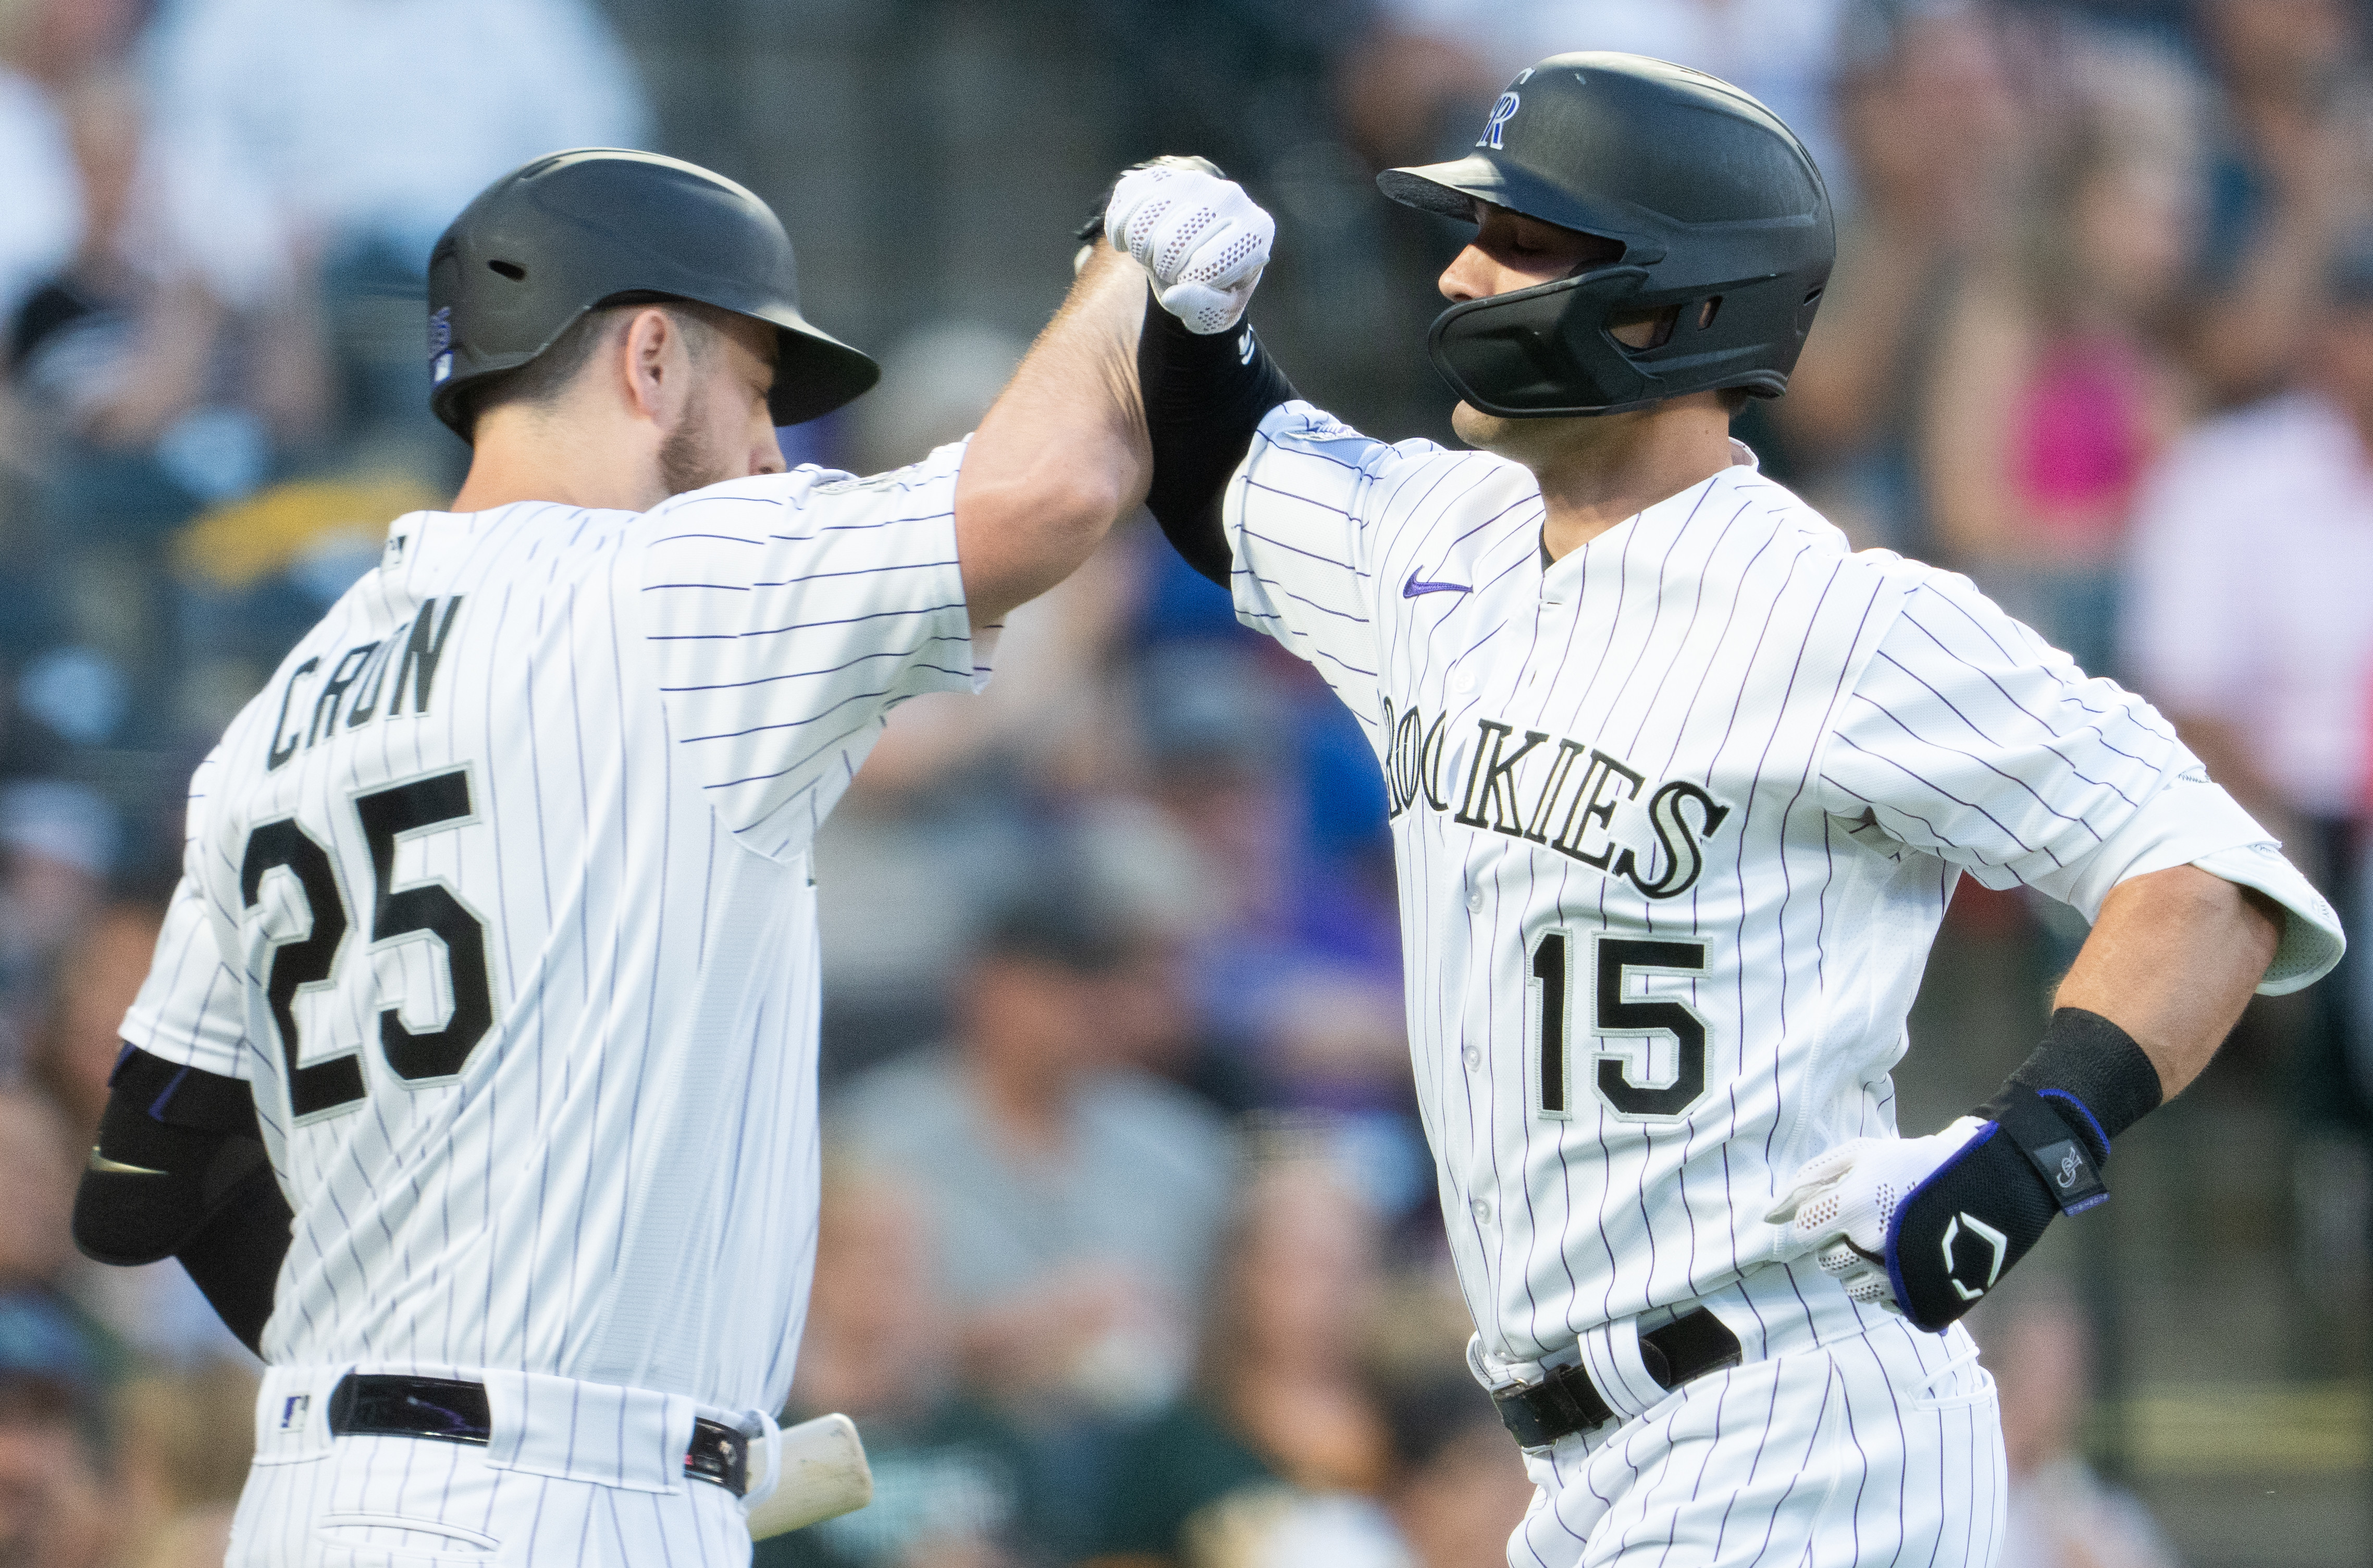 State of the Position: Justin Morneau attempts to fill Todd Helton's